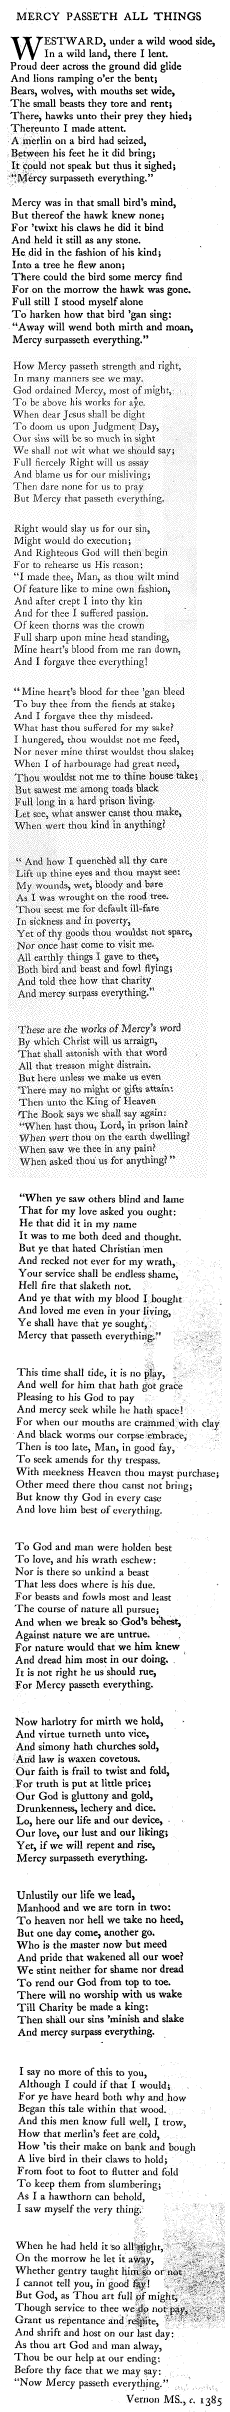 Mercy Passeth All Things (translated from anonymous Middle English) by Margot Robert Adamson